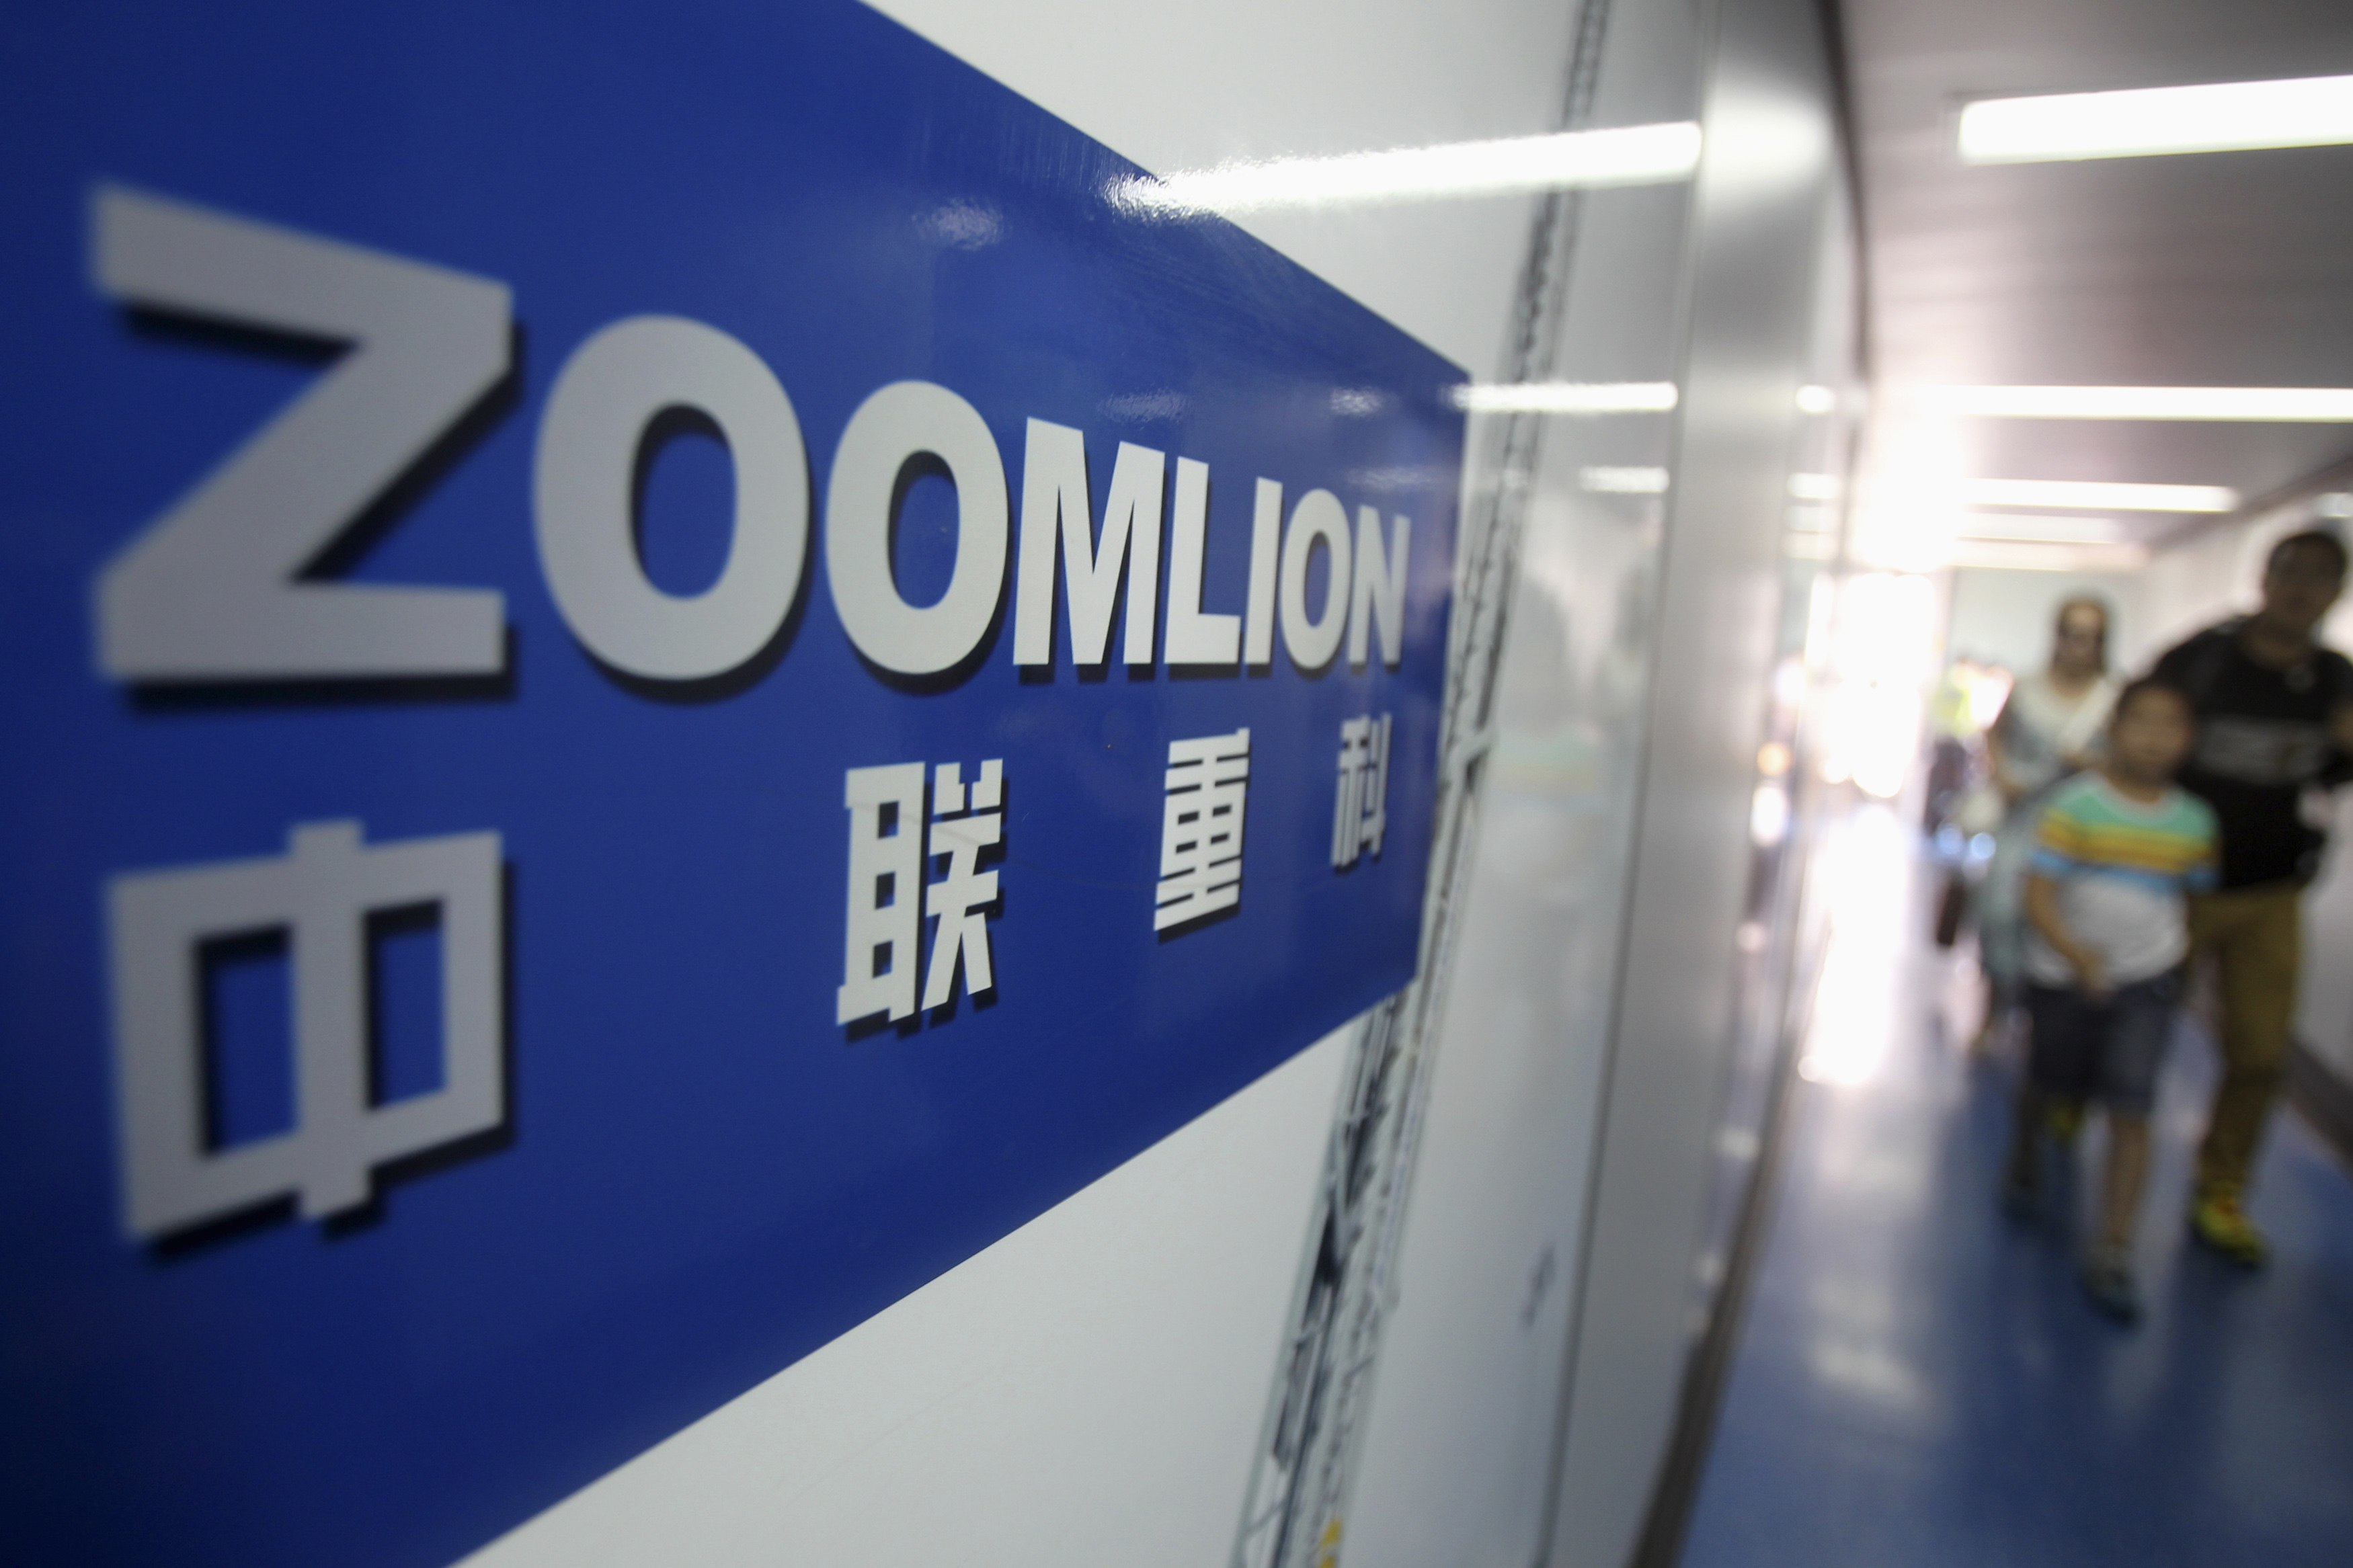 A Zoomlion company logo is seen on an advertisement as passengers walk past at an airport in Changsha, Hunan province in this July 13, 2013 file photo. Chinese construction machinery maker Zoomlion Heavy Industry Science and Technology Co Ltd has told analysts it rejected some 15 percent of new orders for truck-mounted concrete pumps in the first half for fear that China's property market slowdown will hit customers' ability to pay for them. Picture taken July 13, 2013. REUTERS/Stringer/Files (CHINA - Tags: BUSINESS LOGO) CHINA OUT. NO COMMERCIAL OR EDITORIAL SALES IN CHINA